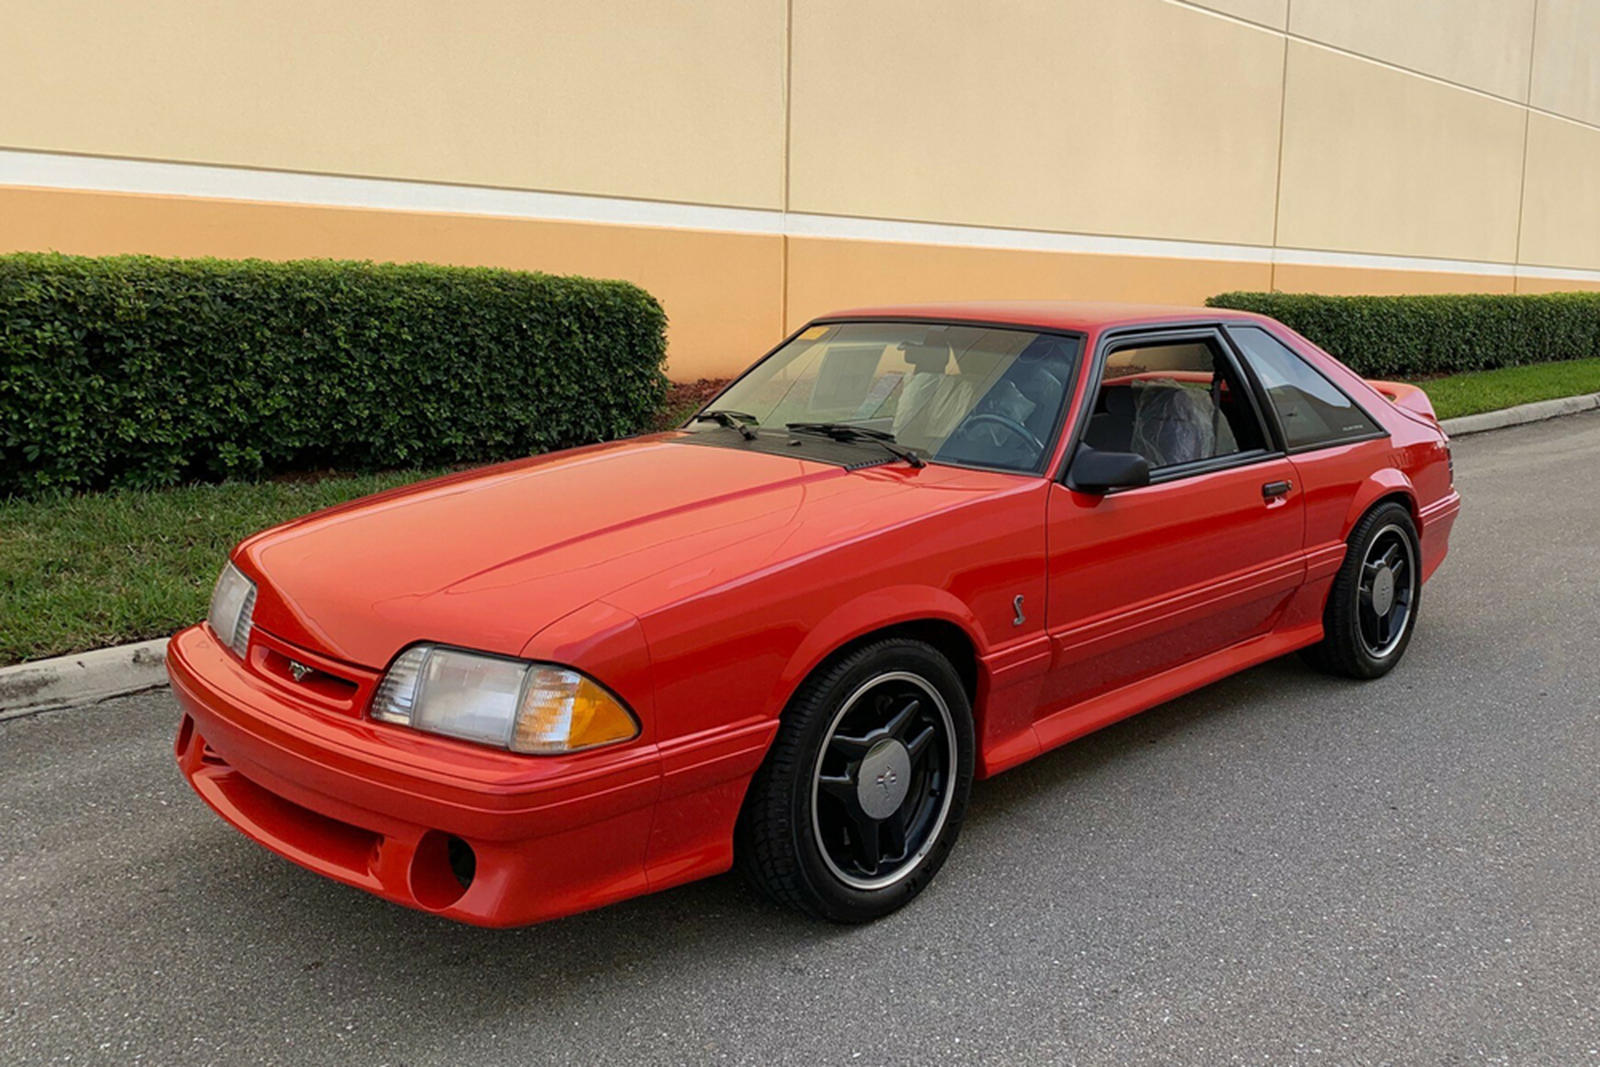 Back in January this year, a 1993 Mustang SVT Cobra R sold through Barrett-...